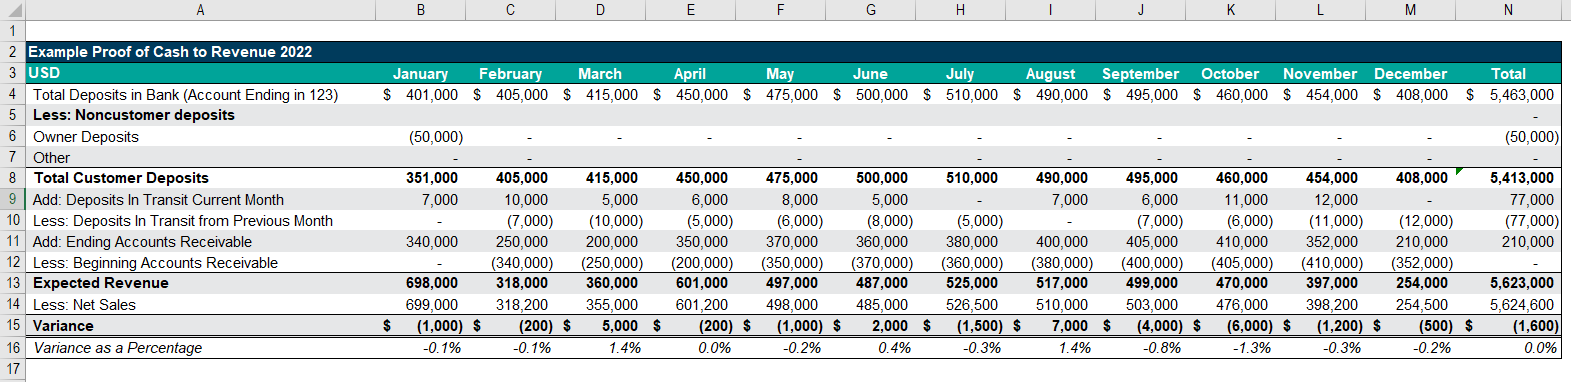 Proof of Cash Excel spreadsheet example for illustrative purposes